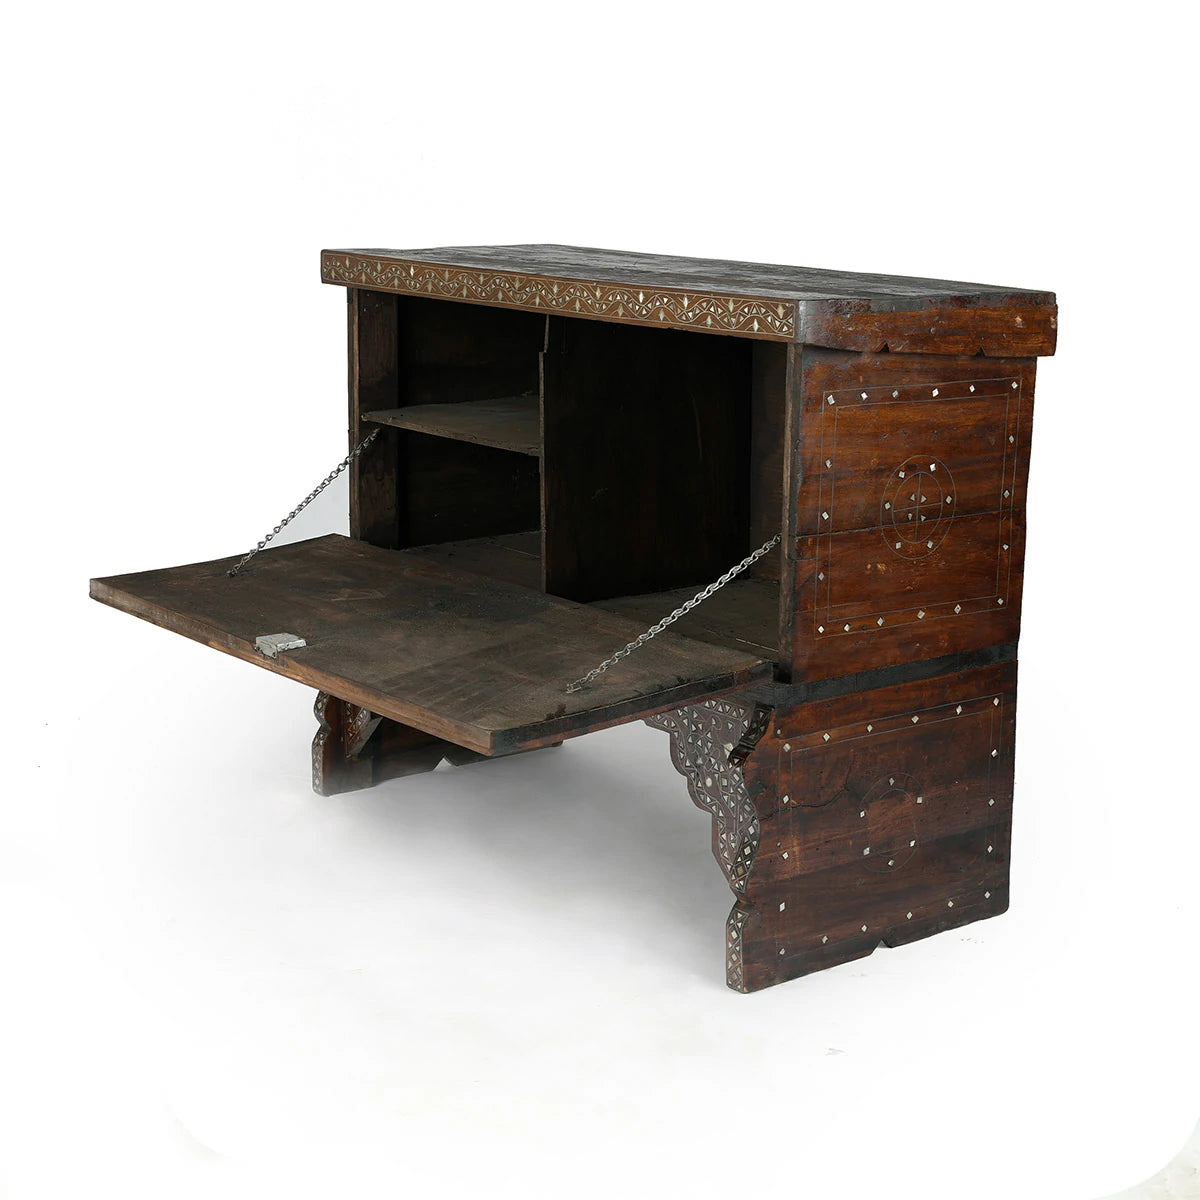 Open Angled View of Antique Hard Wood Console showcasing storage spaces